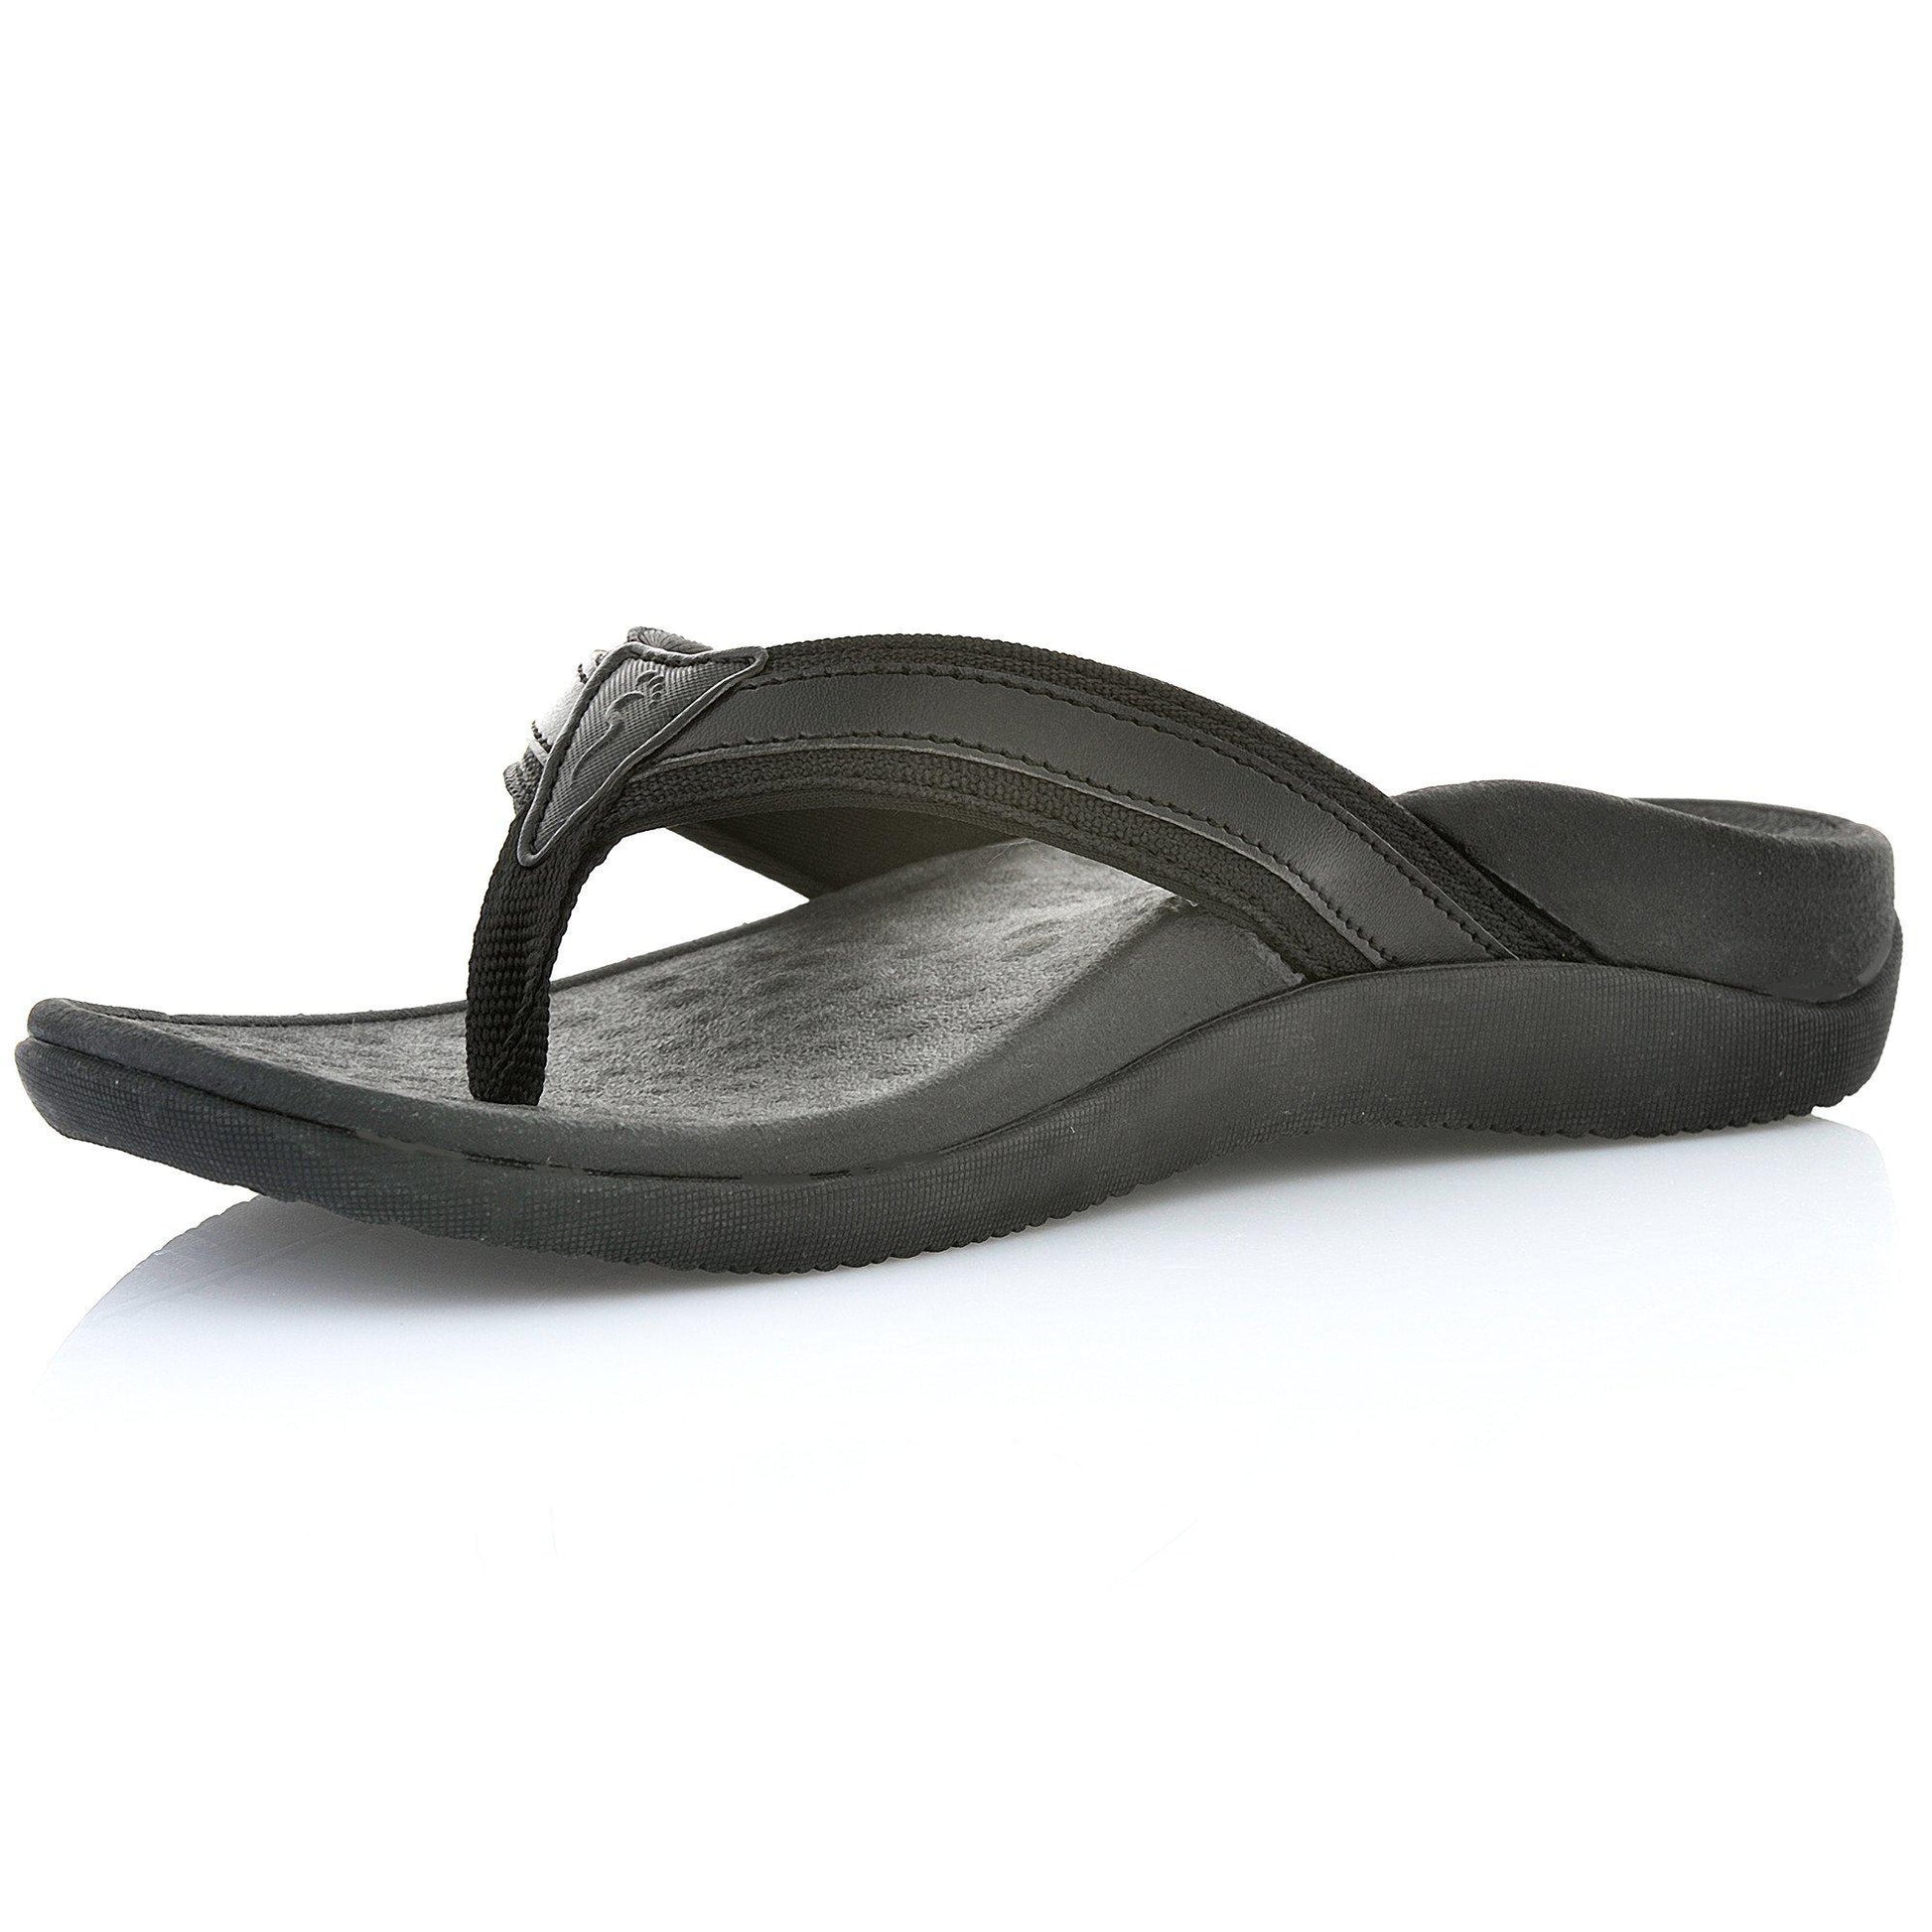  Arch Support Flip-Flops for Men and Women